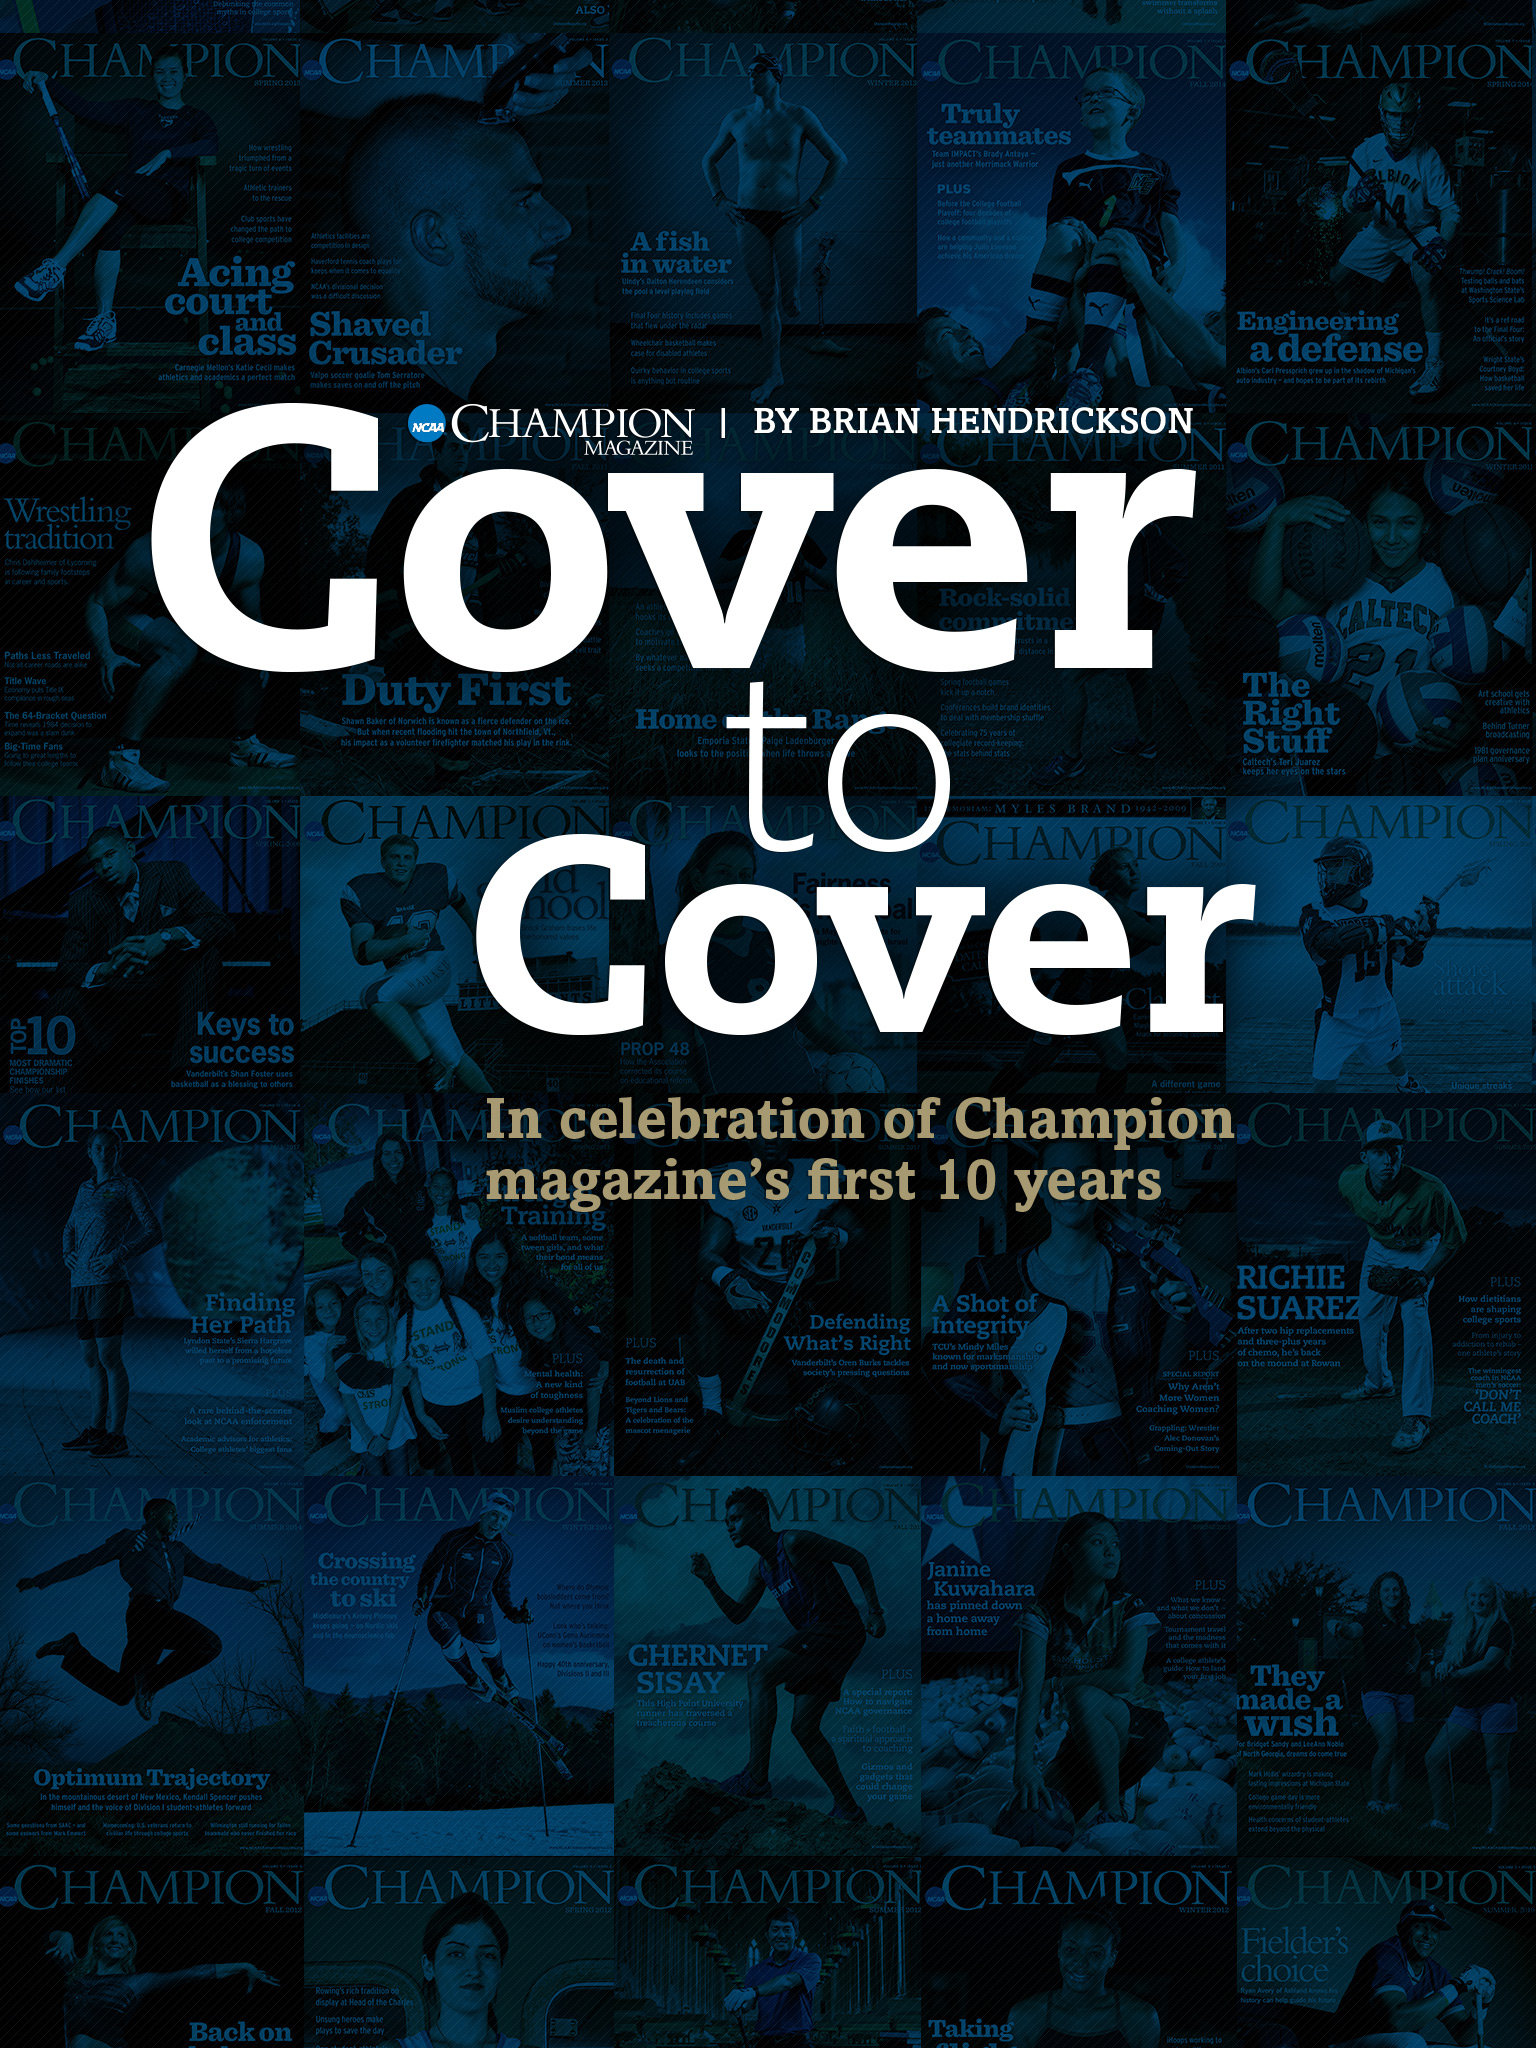 Cover to Cover | An NCAA Champion Feature | NCAA.org